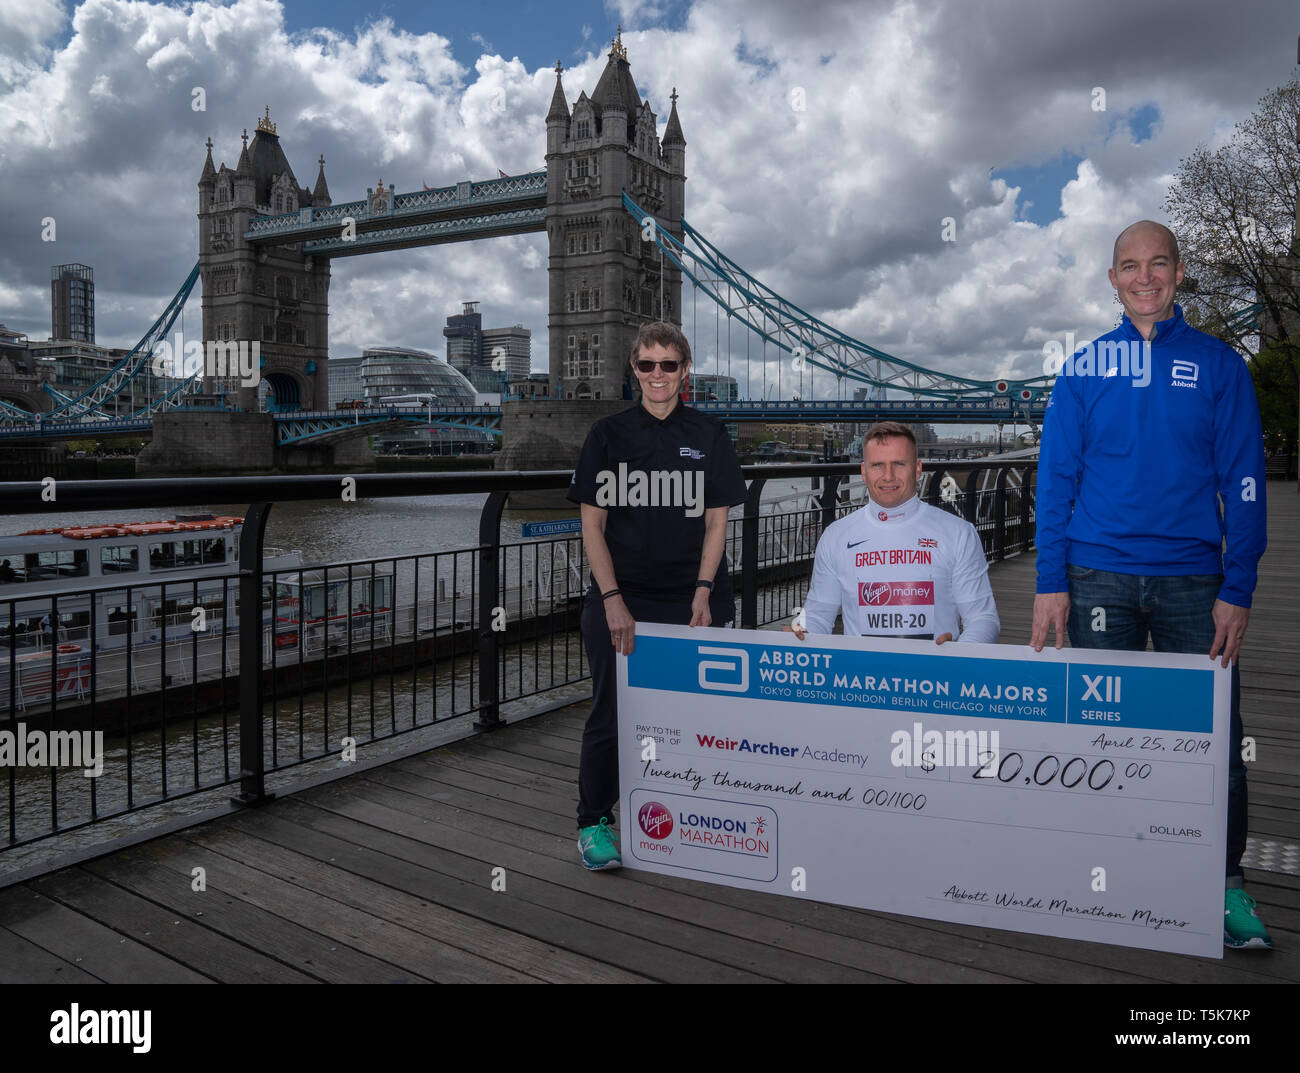 David Weir flanked by Michelle Weltman, Elite Wheelchair Coordinator, Abbot World Marathon Majors and Chris Miller DVP, Global Brand Strategy & Innovation, Abbott accepts a cheque on behalf of the Weir Archer Academy from Abbot World Marathon Majors for £20,000 to mark his 20th consecutive London Marathon during a photocall outside Tower Bridge, London. Stock Photo